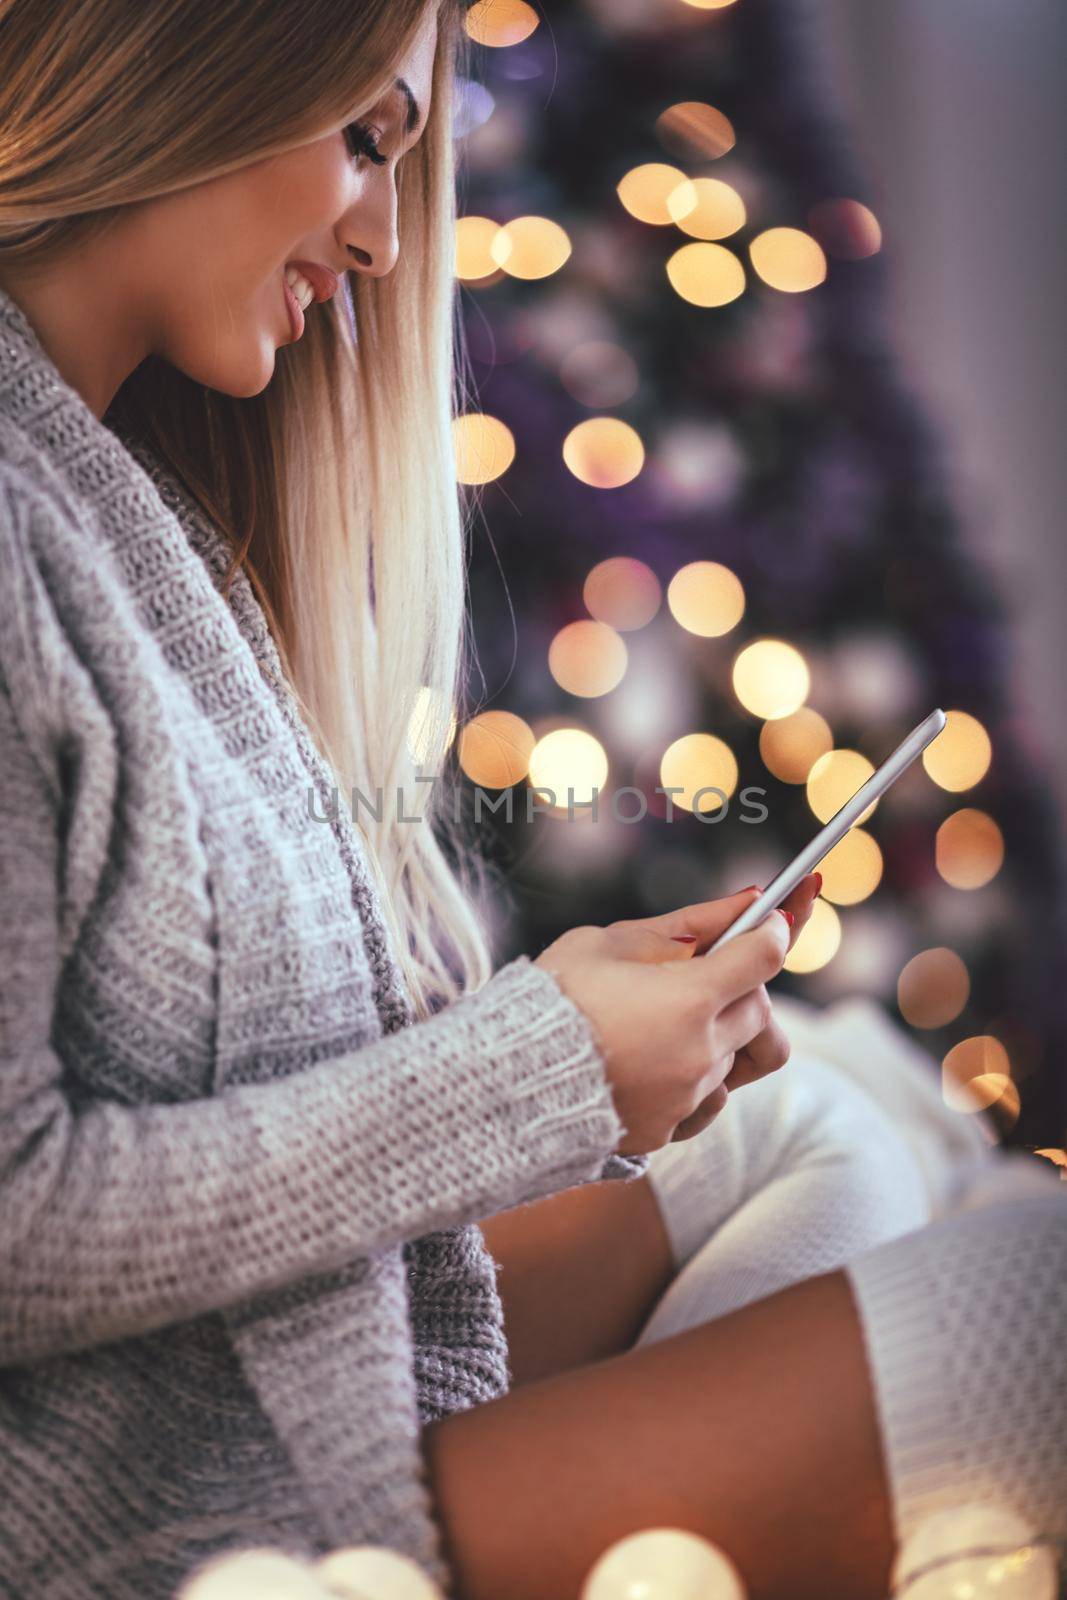 Cute young smiling woman using smarthphone and smiling during cozy Xmas holidays at home.